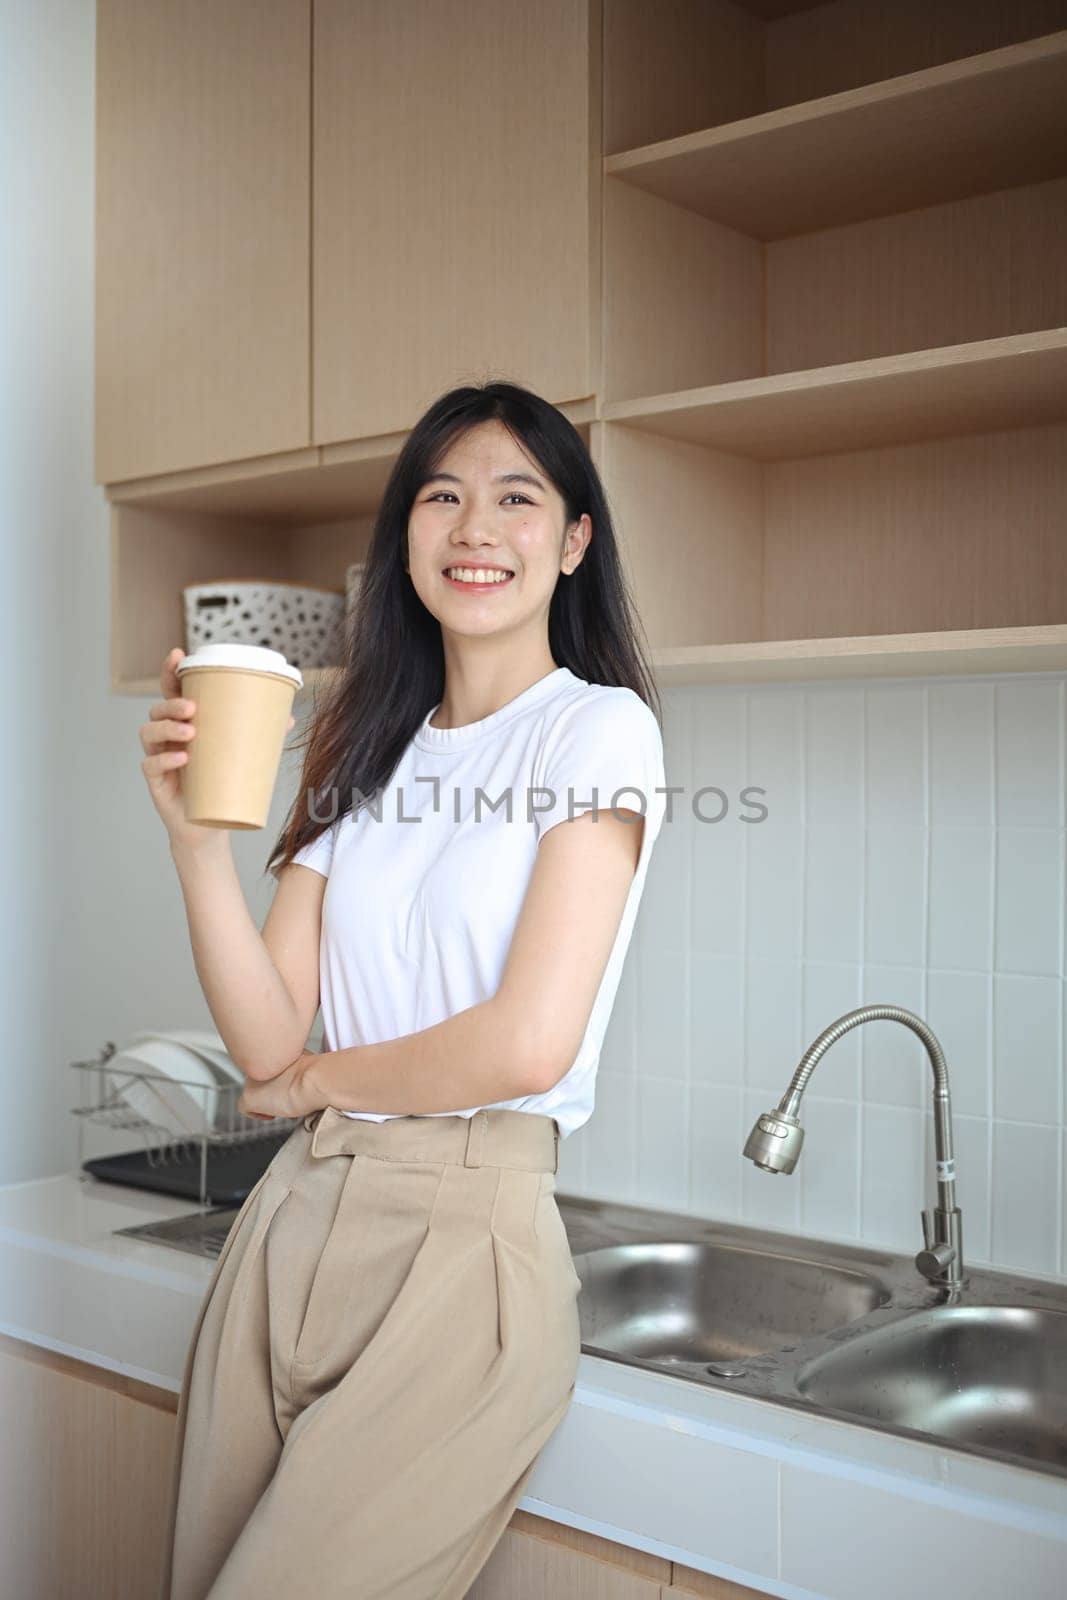 Charming young Asian woman enjoying fresh aromatic coffee standing in the kitchen.